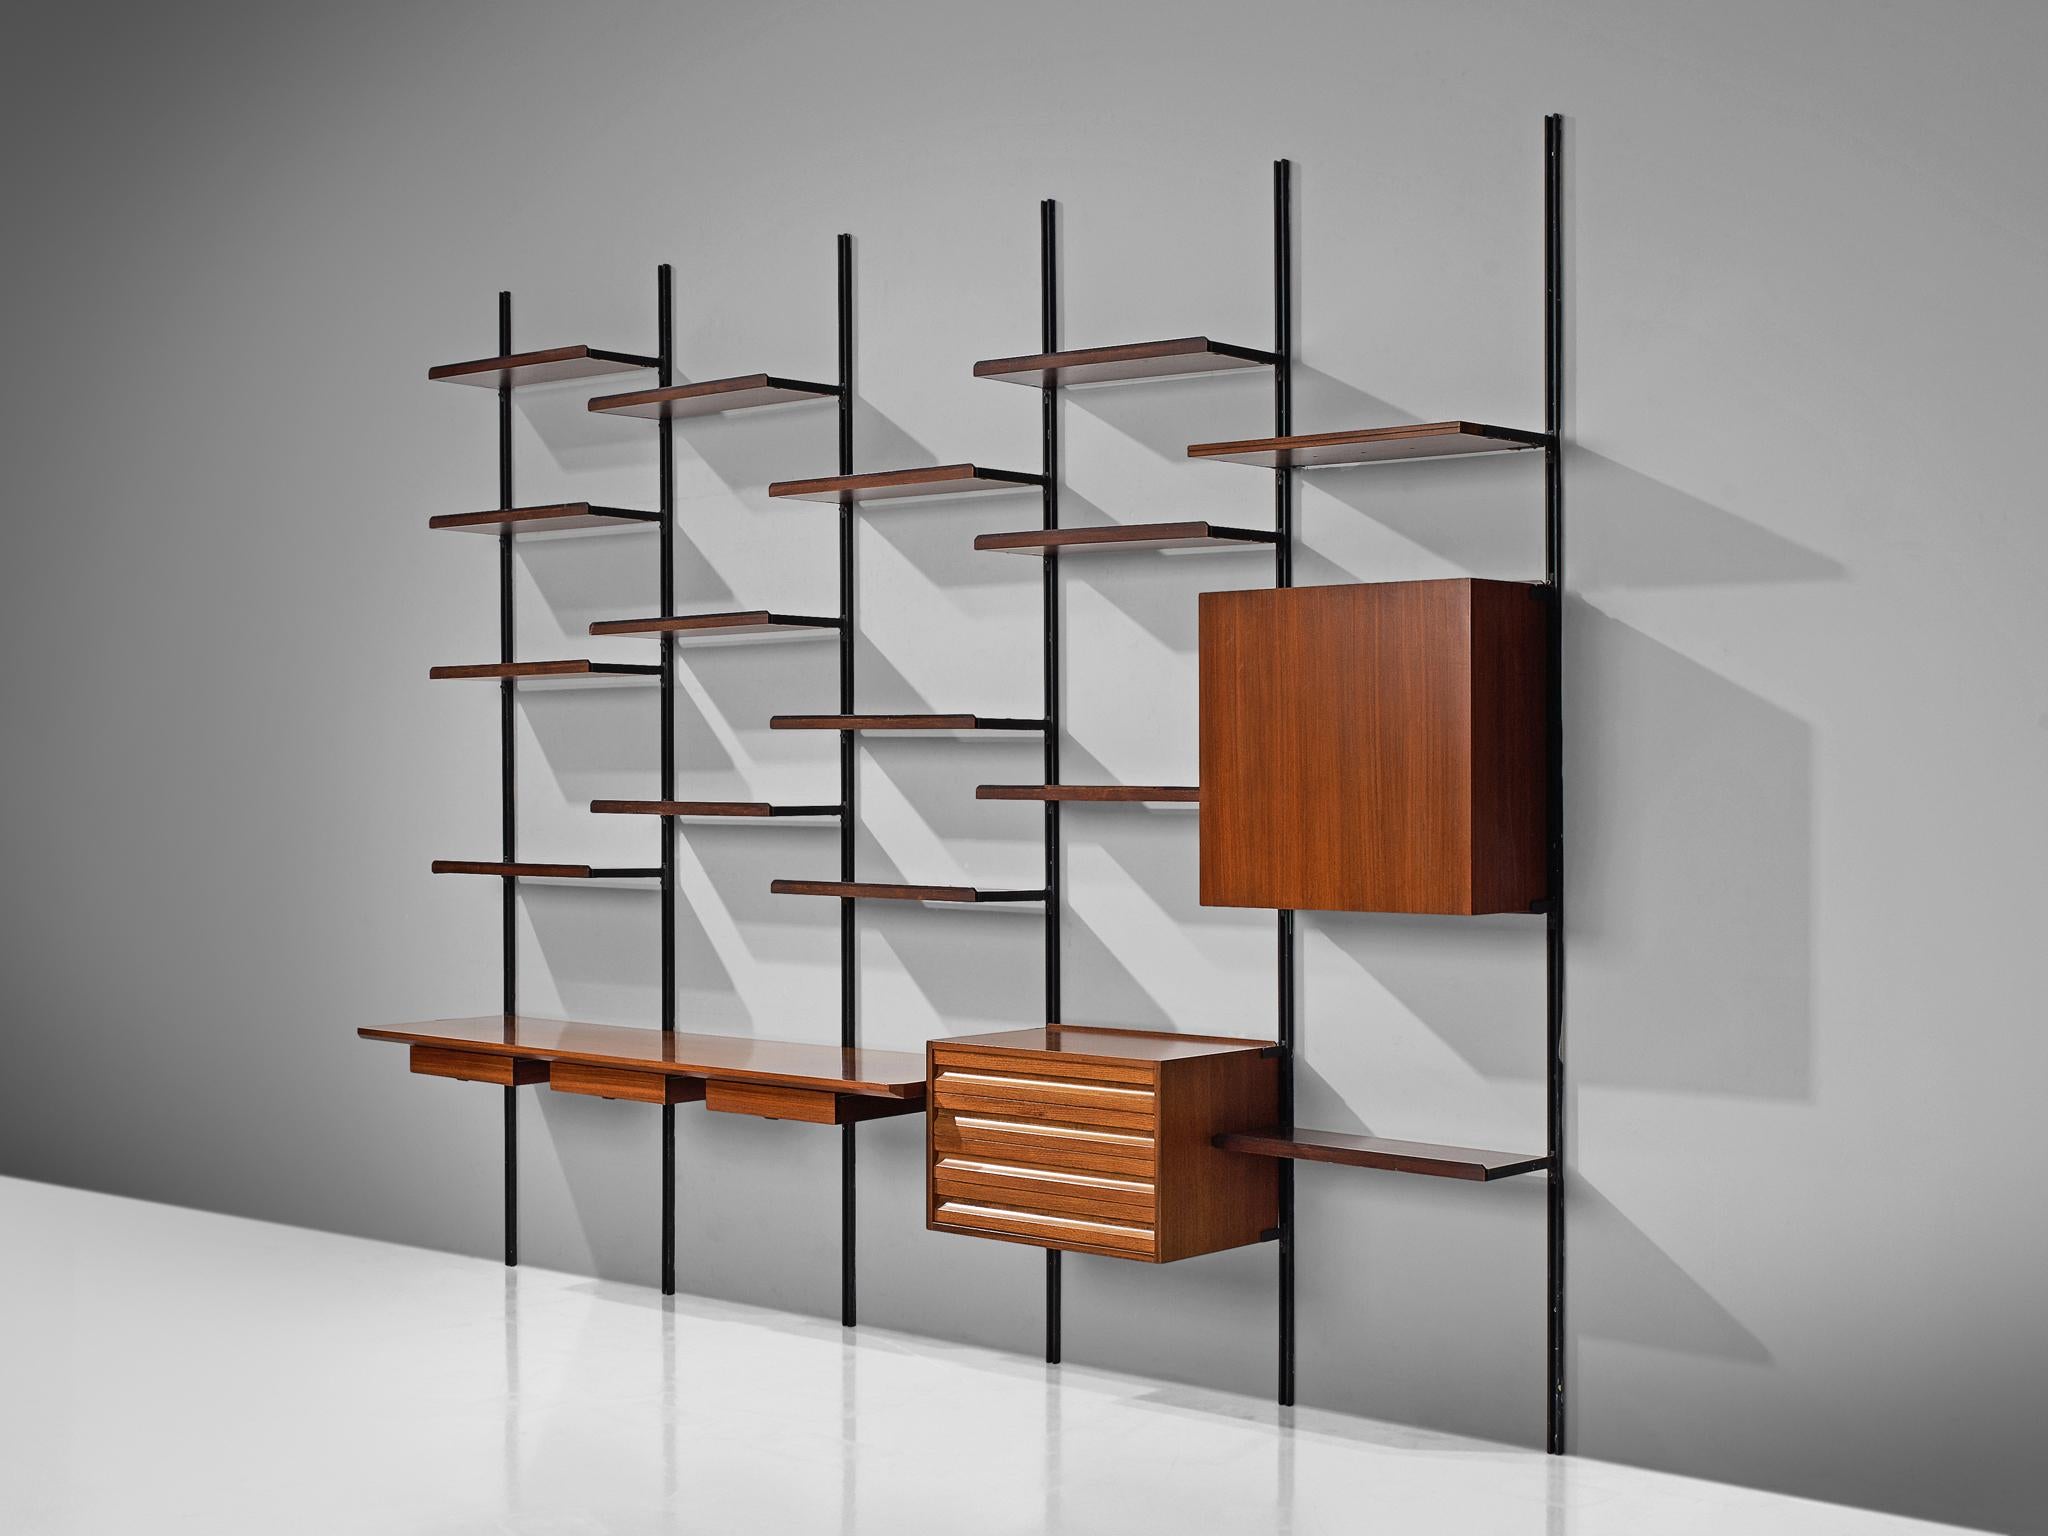 Osvaldo Borsani for Tecno, bookcase or wall unit E22, in metal and rosewood, Italy, 1950s.

This wall-mounted shelving unit is six sections large. This system was developed by Borsani as coordinated system for furnishing either the home or the